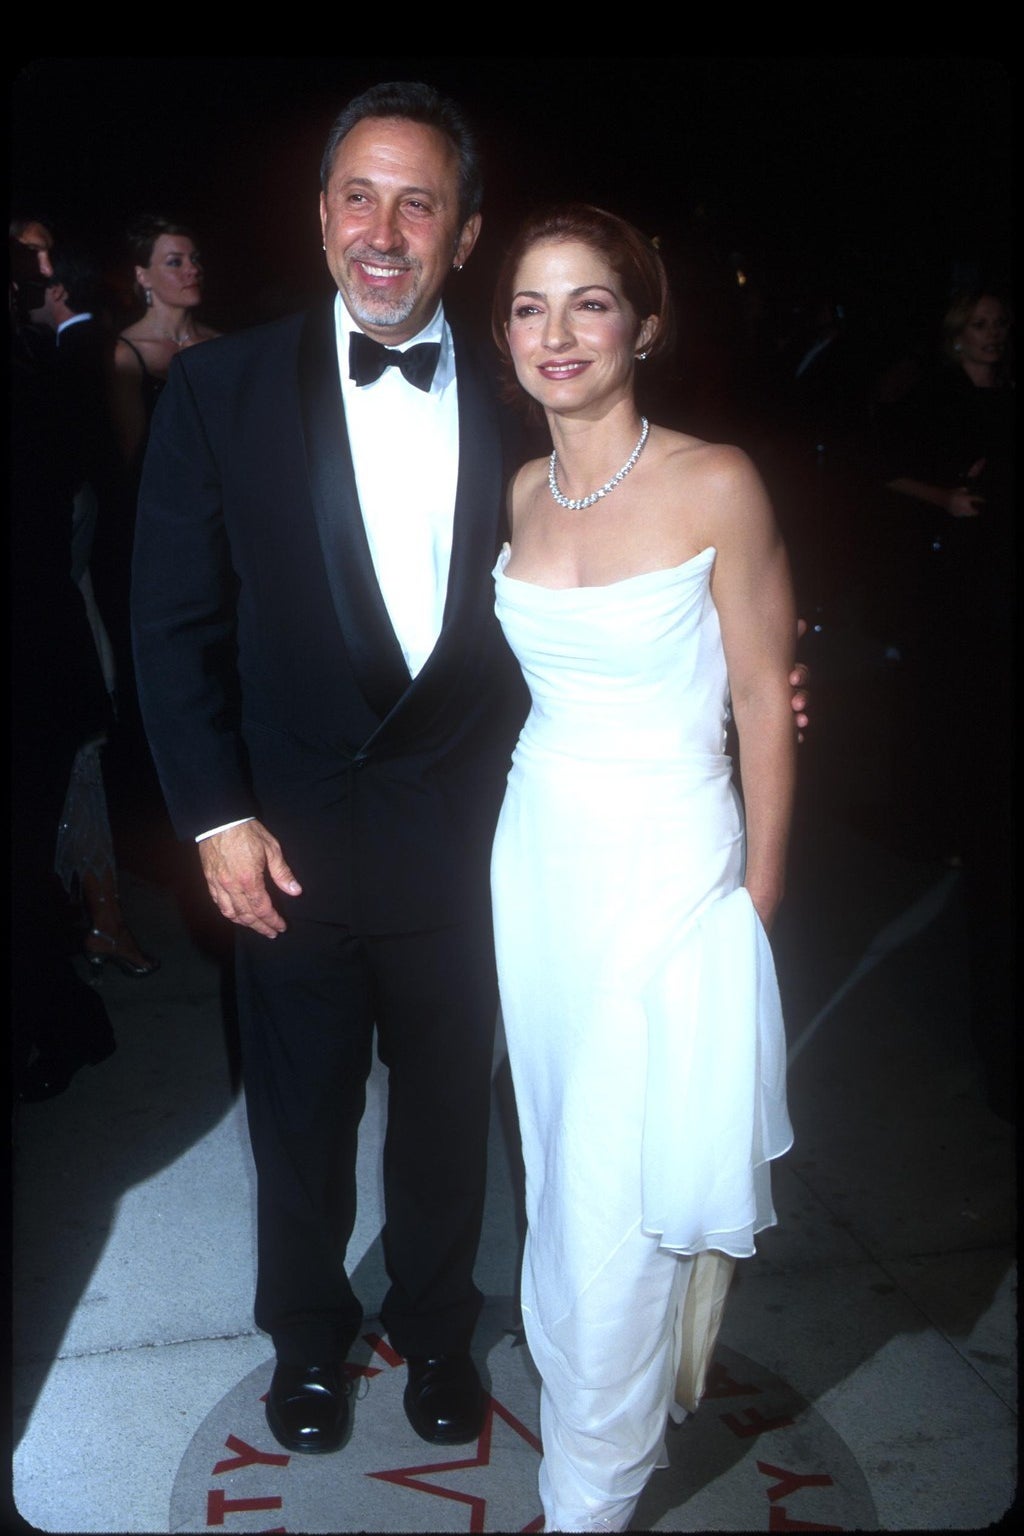 The couple in 2000.